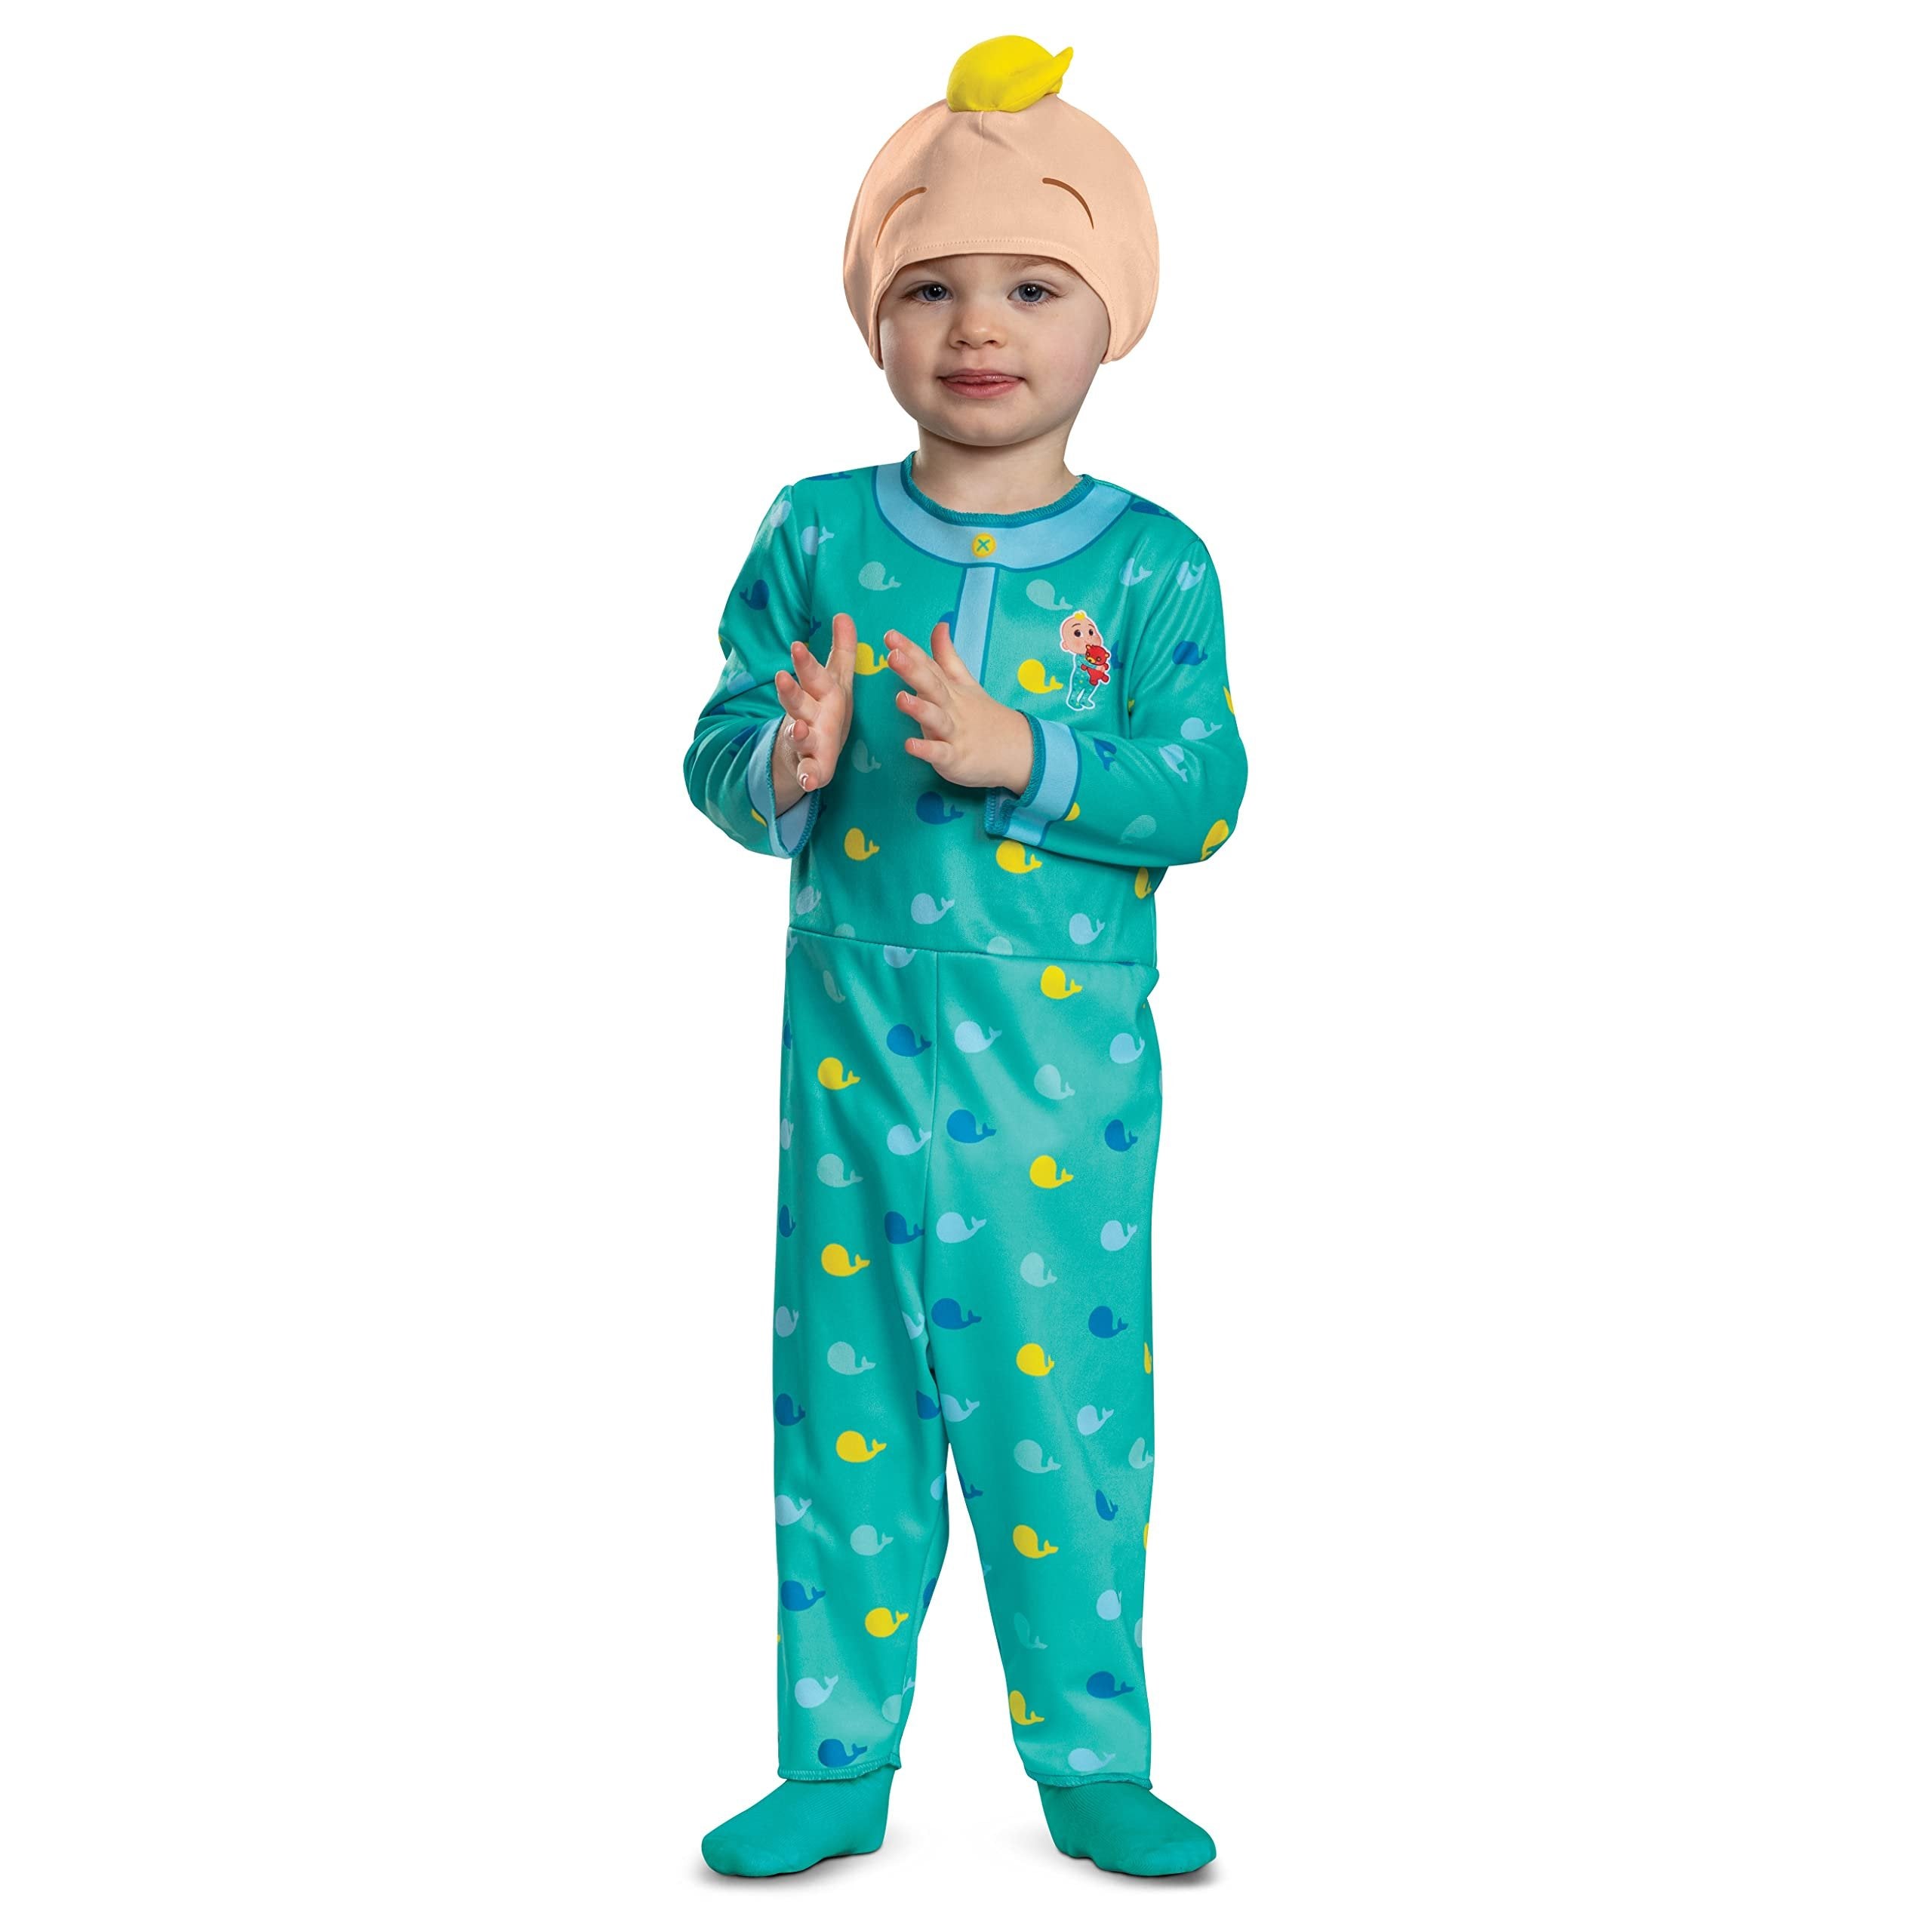 Disguise Cocomelon JJ Costume, Official Cocomelon Costume Pajama Outfit, Toddler Size